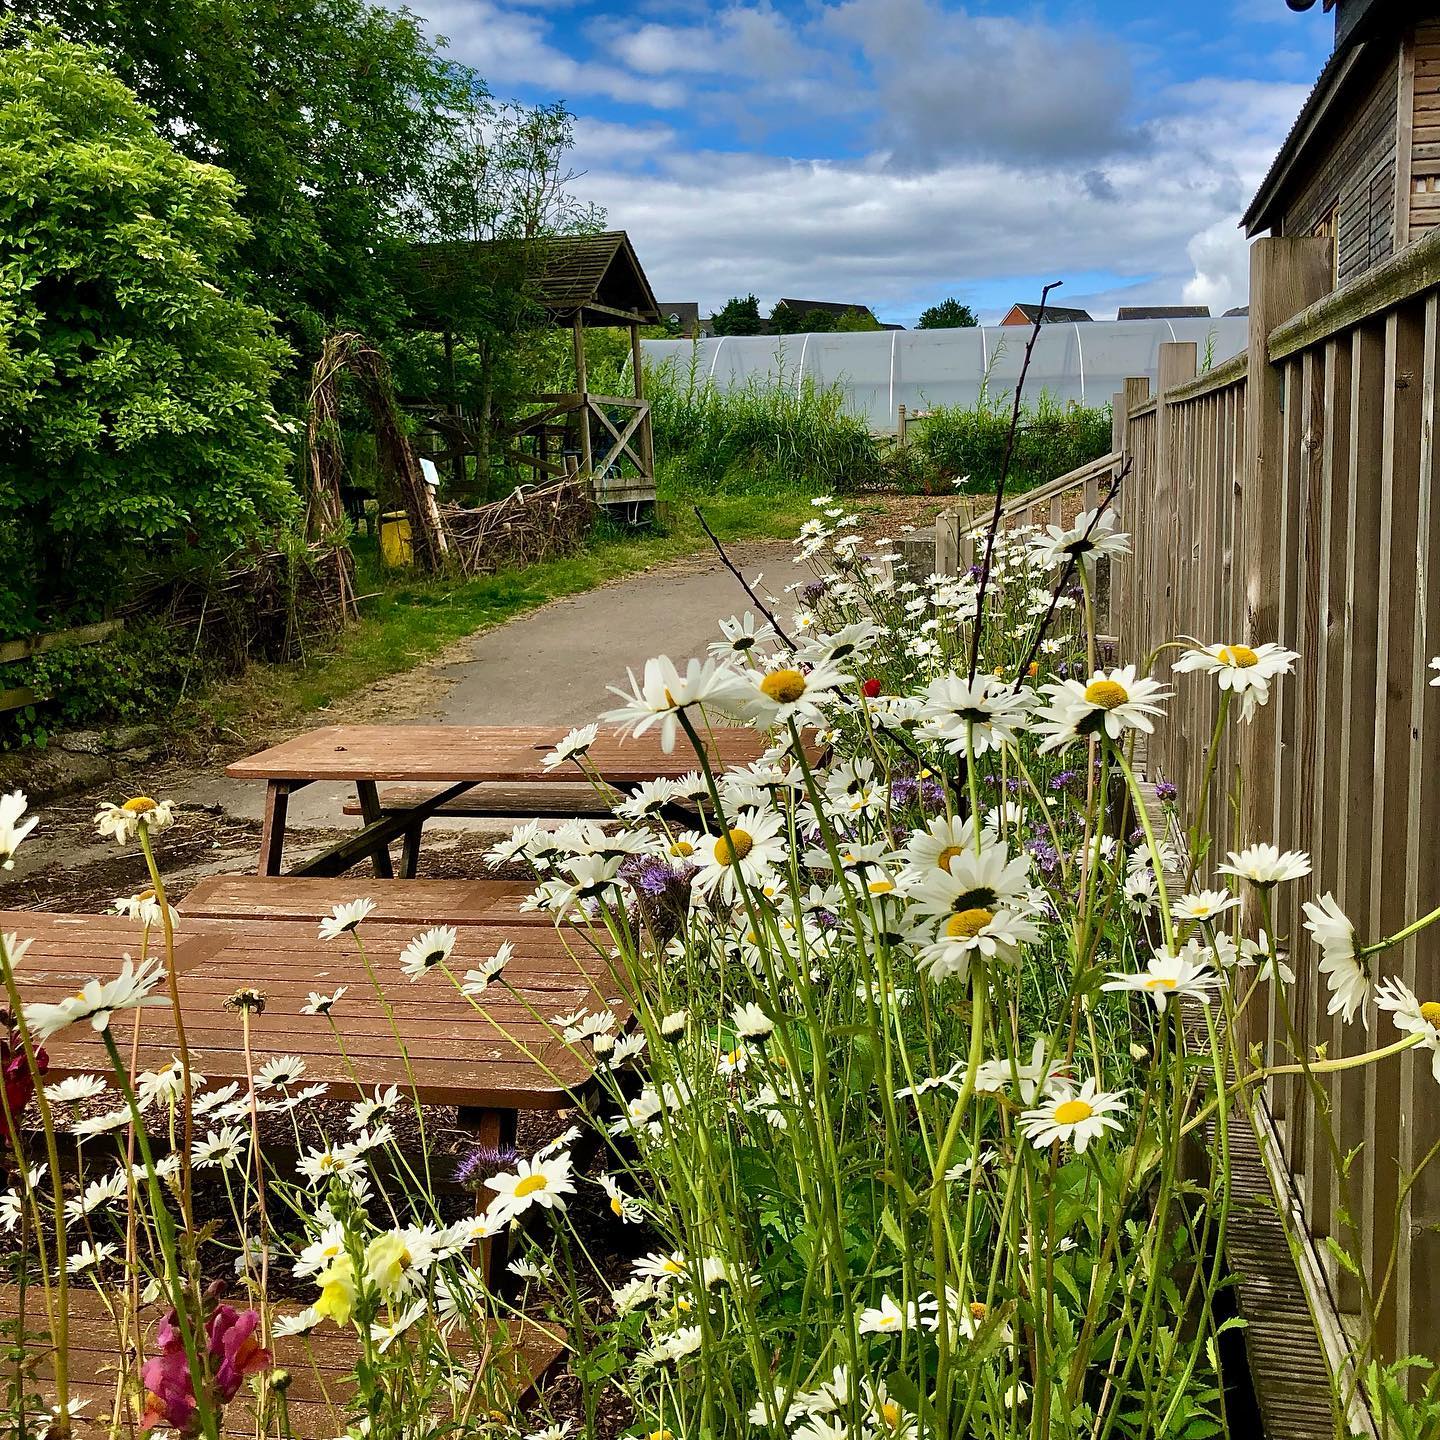 White oxeye daisies grow tall around the picnic tables and wall of Greenslate farm's Strawbale cafe. in the background a lane lined with trees leads to a polytunnel and food growing area.